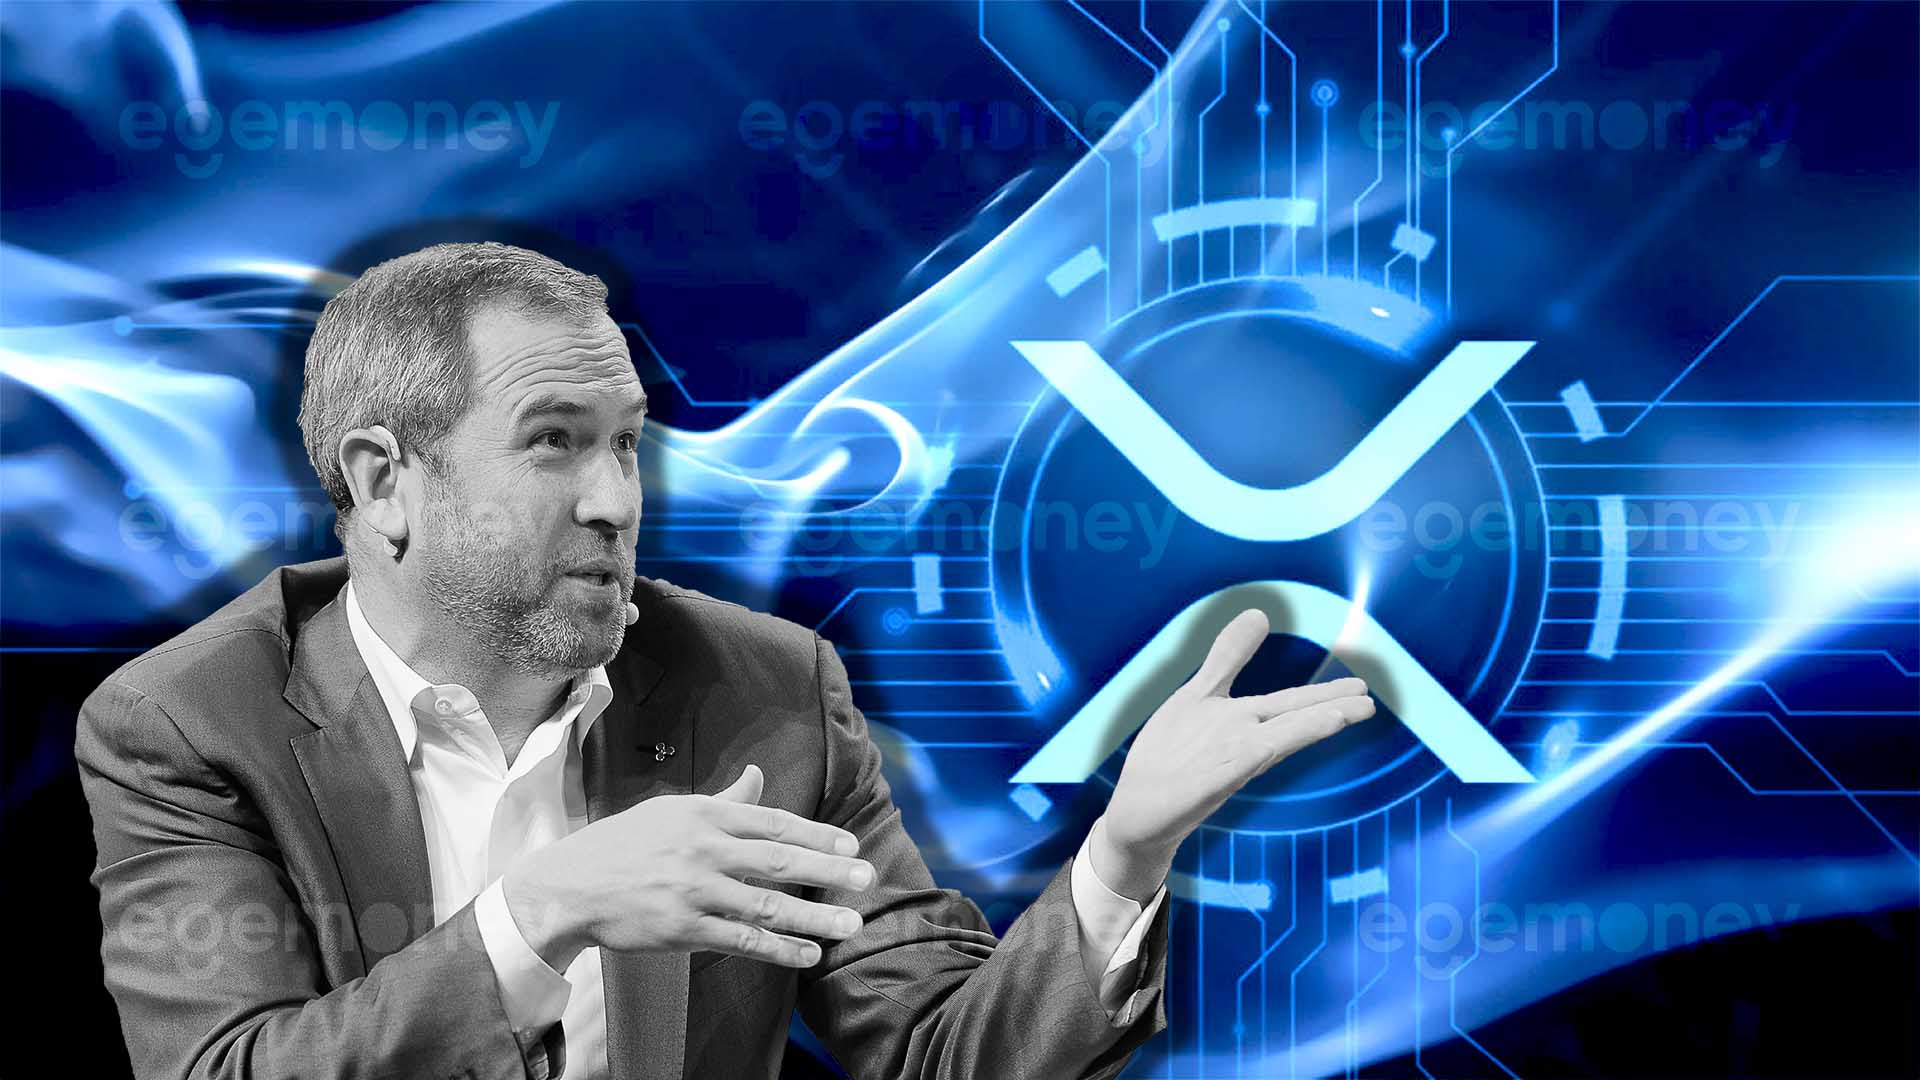 Ripple CEO Garlinghouse Criticizes Gensler’s Management Style